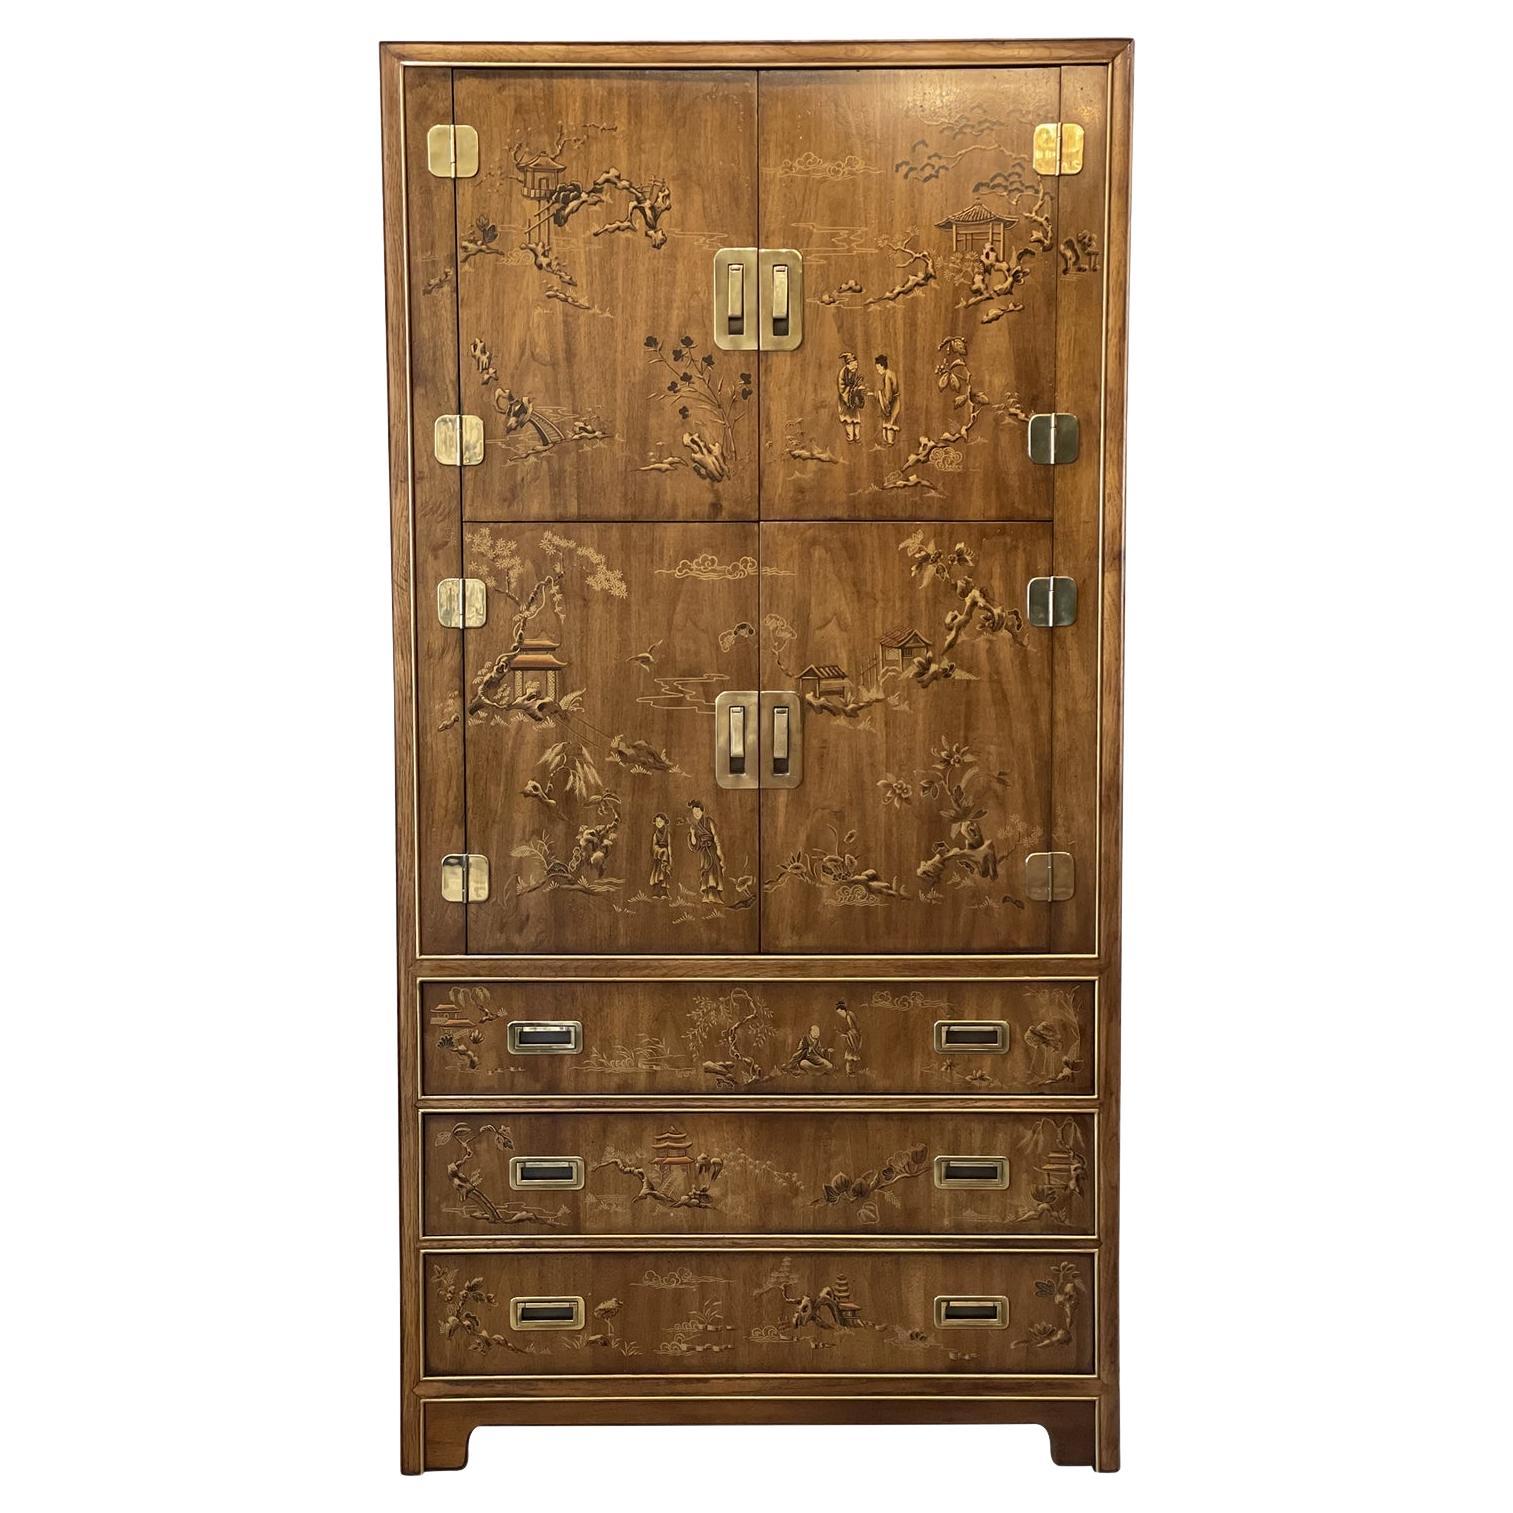 1970s Drexel Heritage Chinoiserie Armoire Dresser For Sale